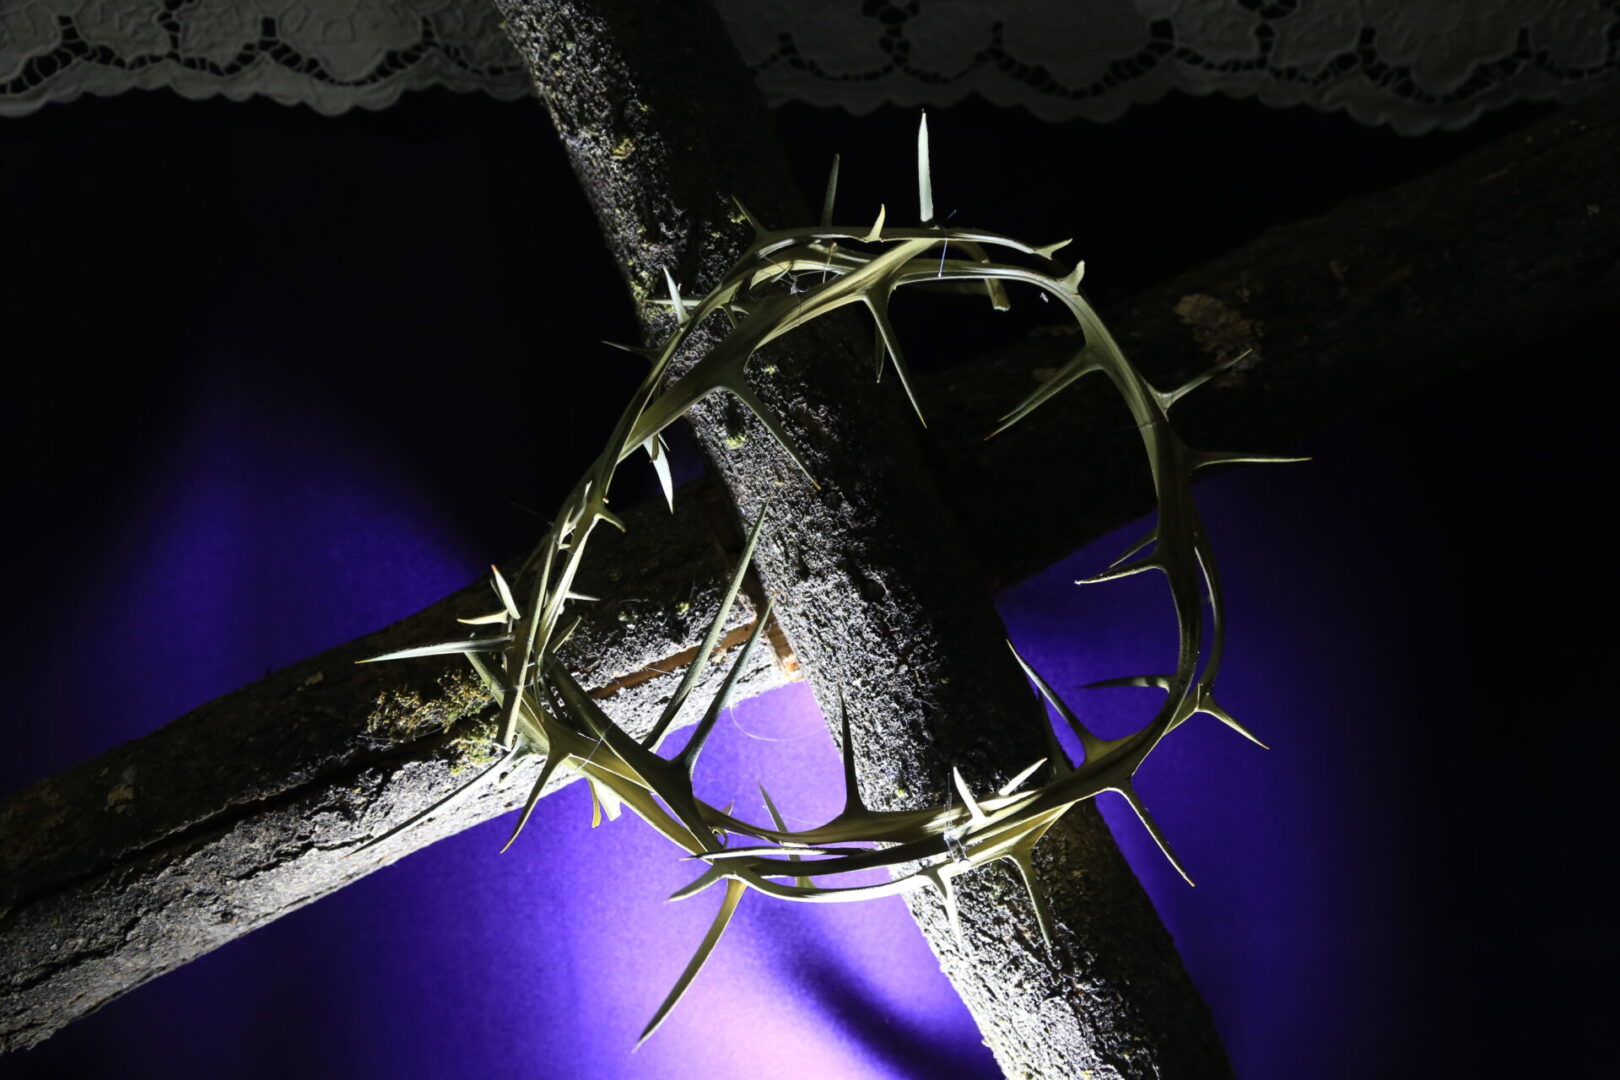 Closeup shot of the branches lent cross